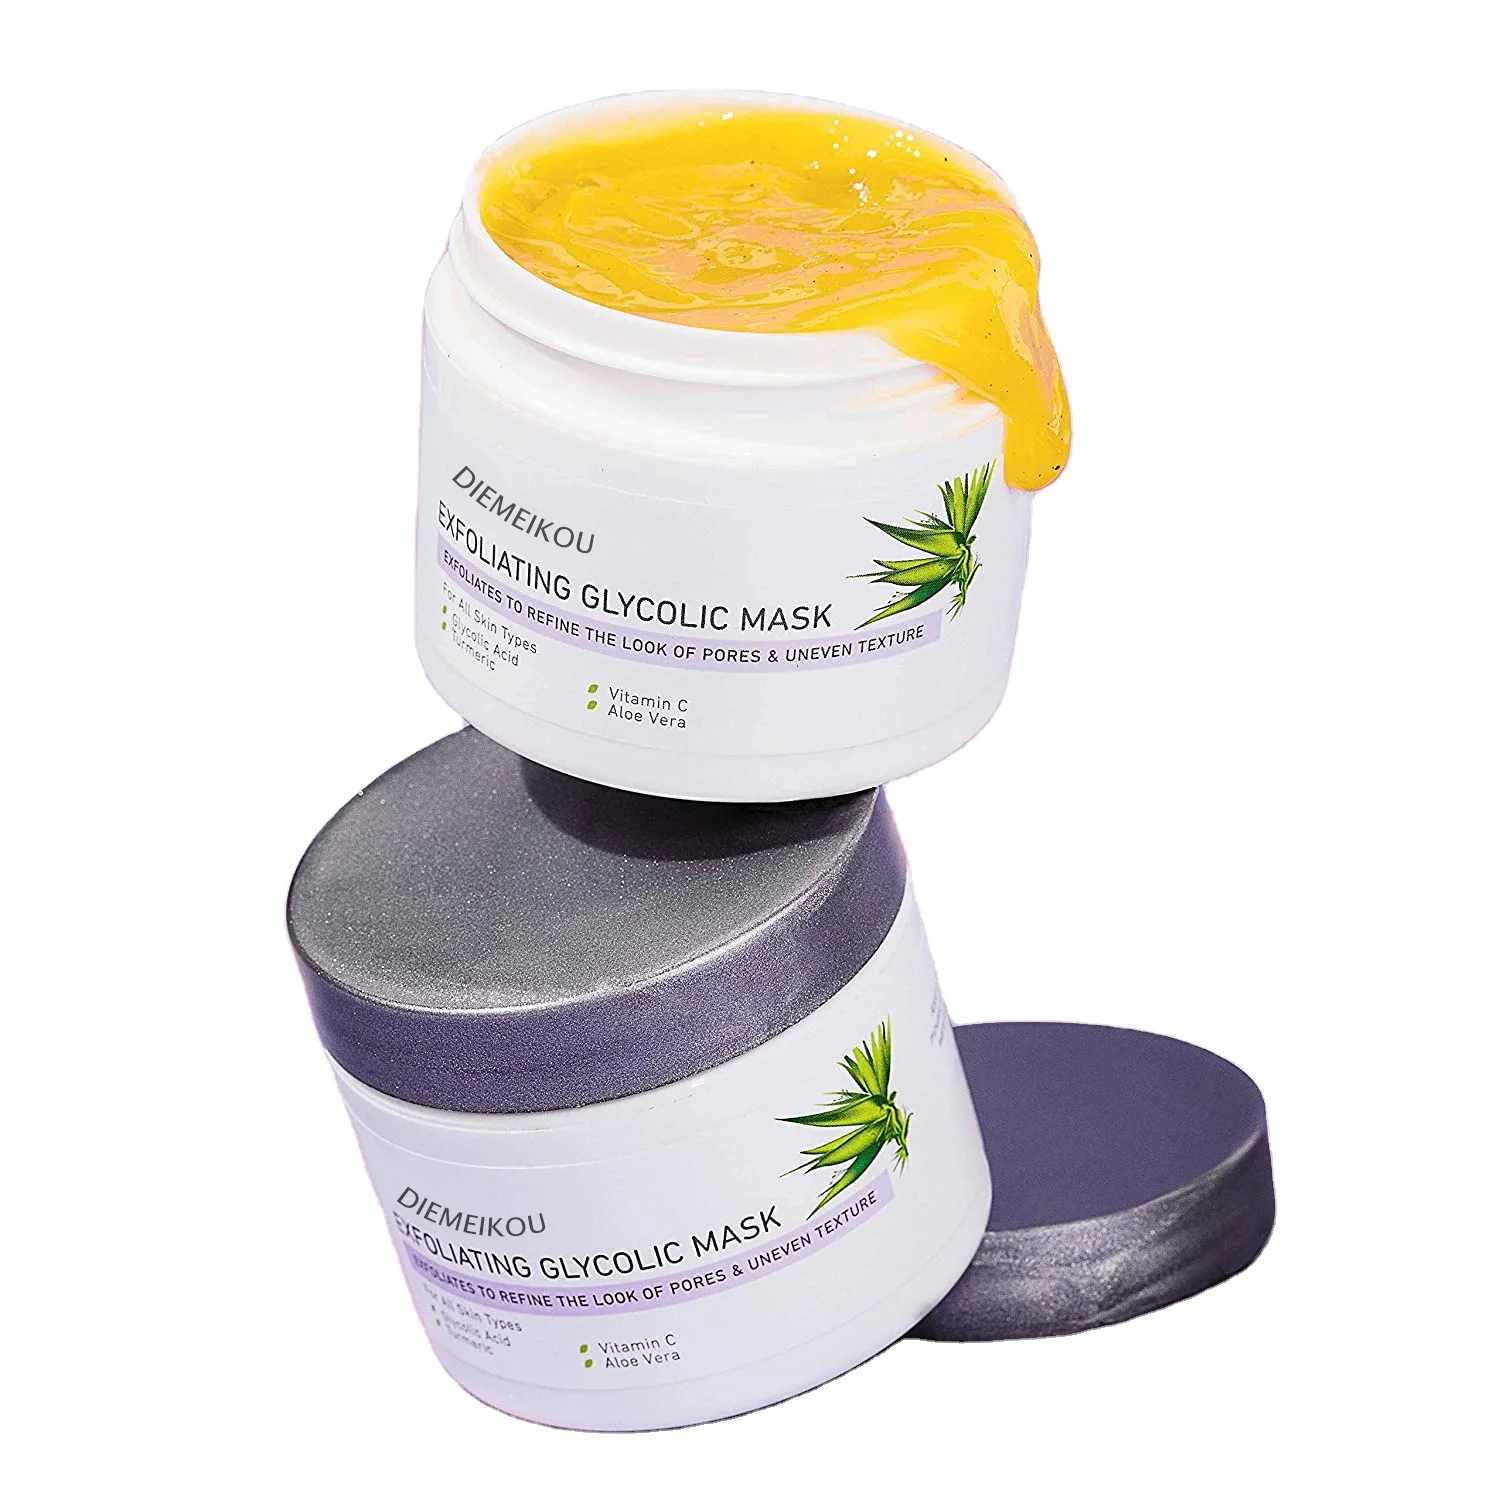 

Hot sale Exfoliating Glycolic Face Mask - Treatment for Brightening and Exfoliation with Turmeric & Vitamin C Mud Face Mask